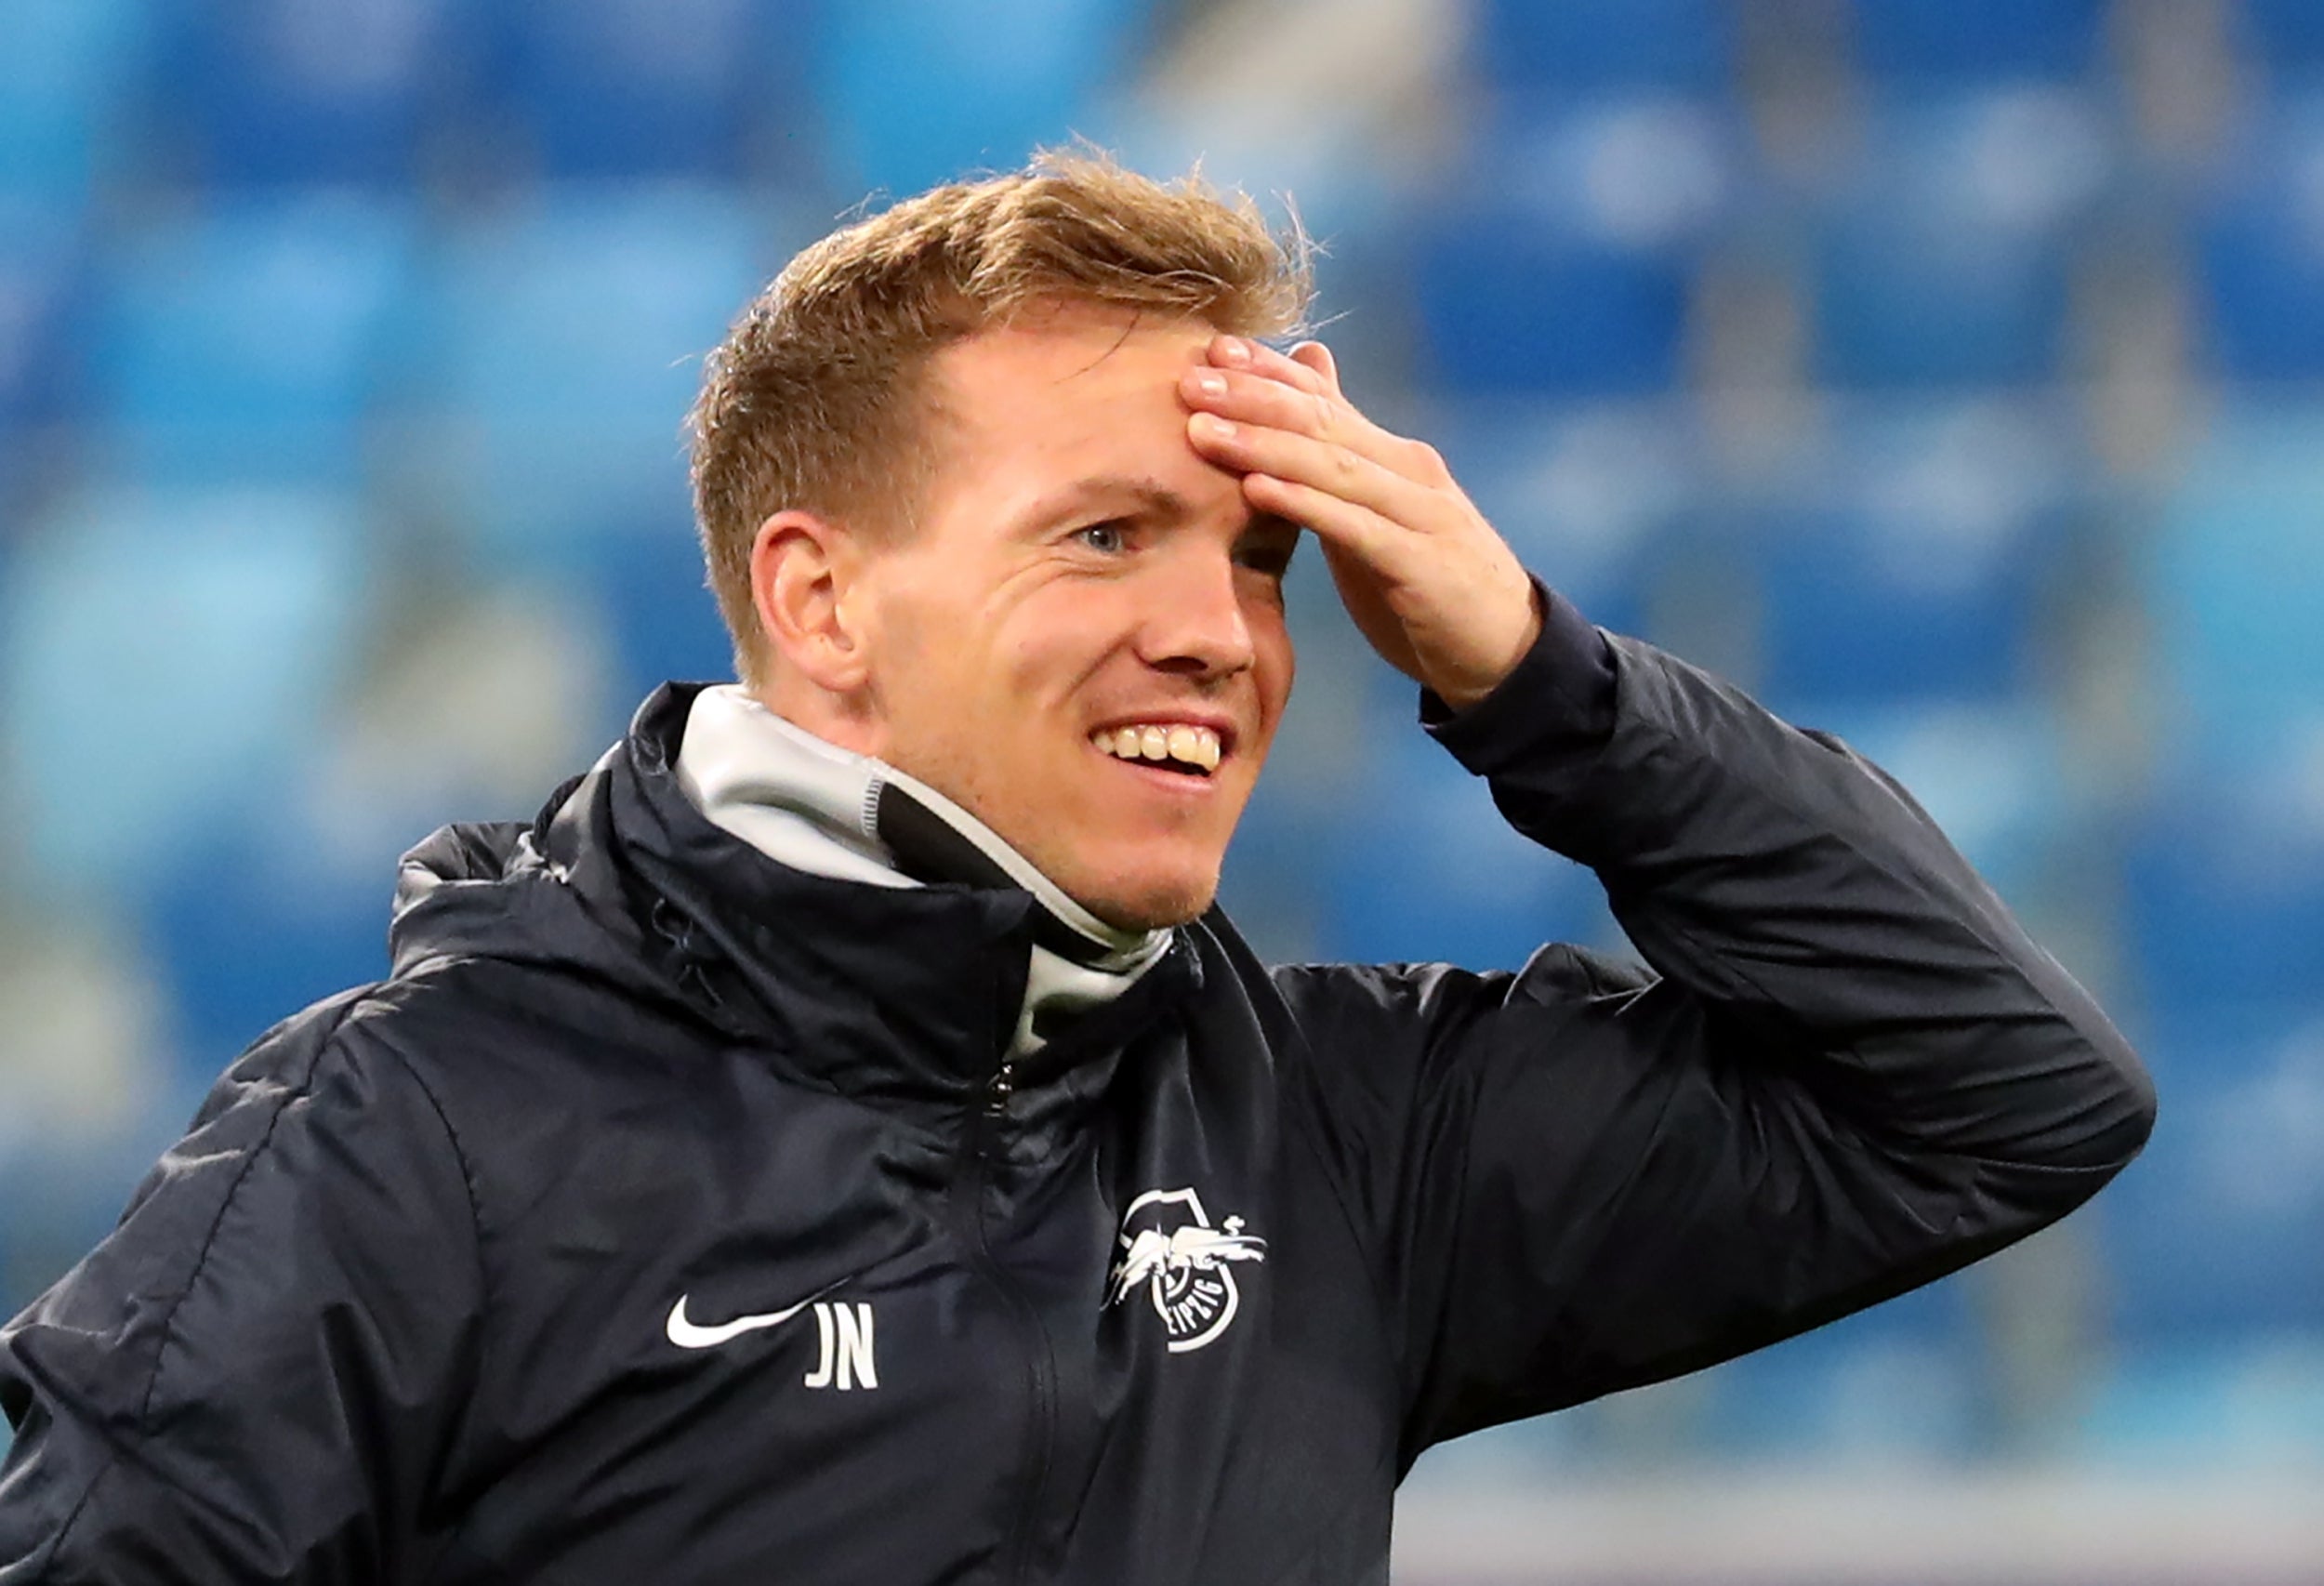 Nagelsmann will manage his first Champions League knock-out tie against Spurs